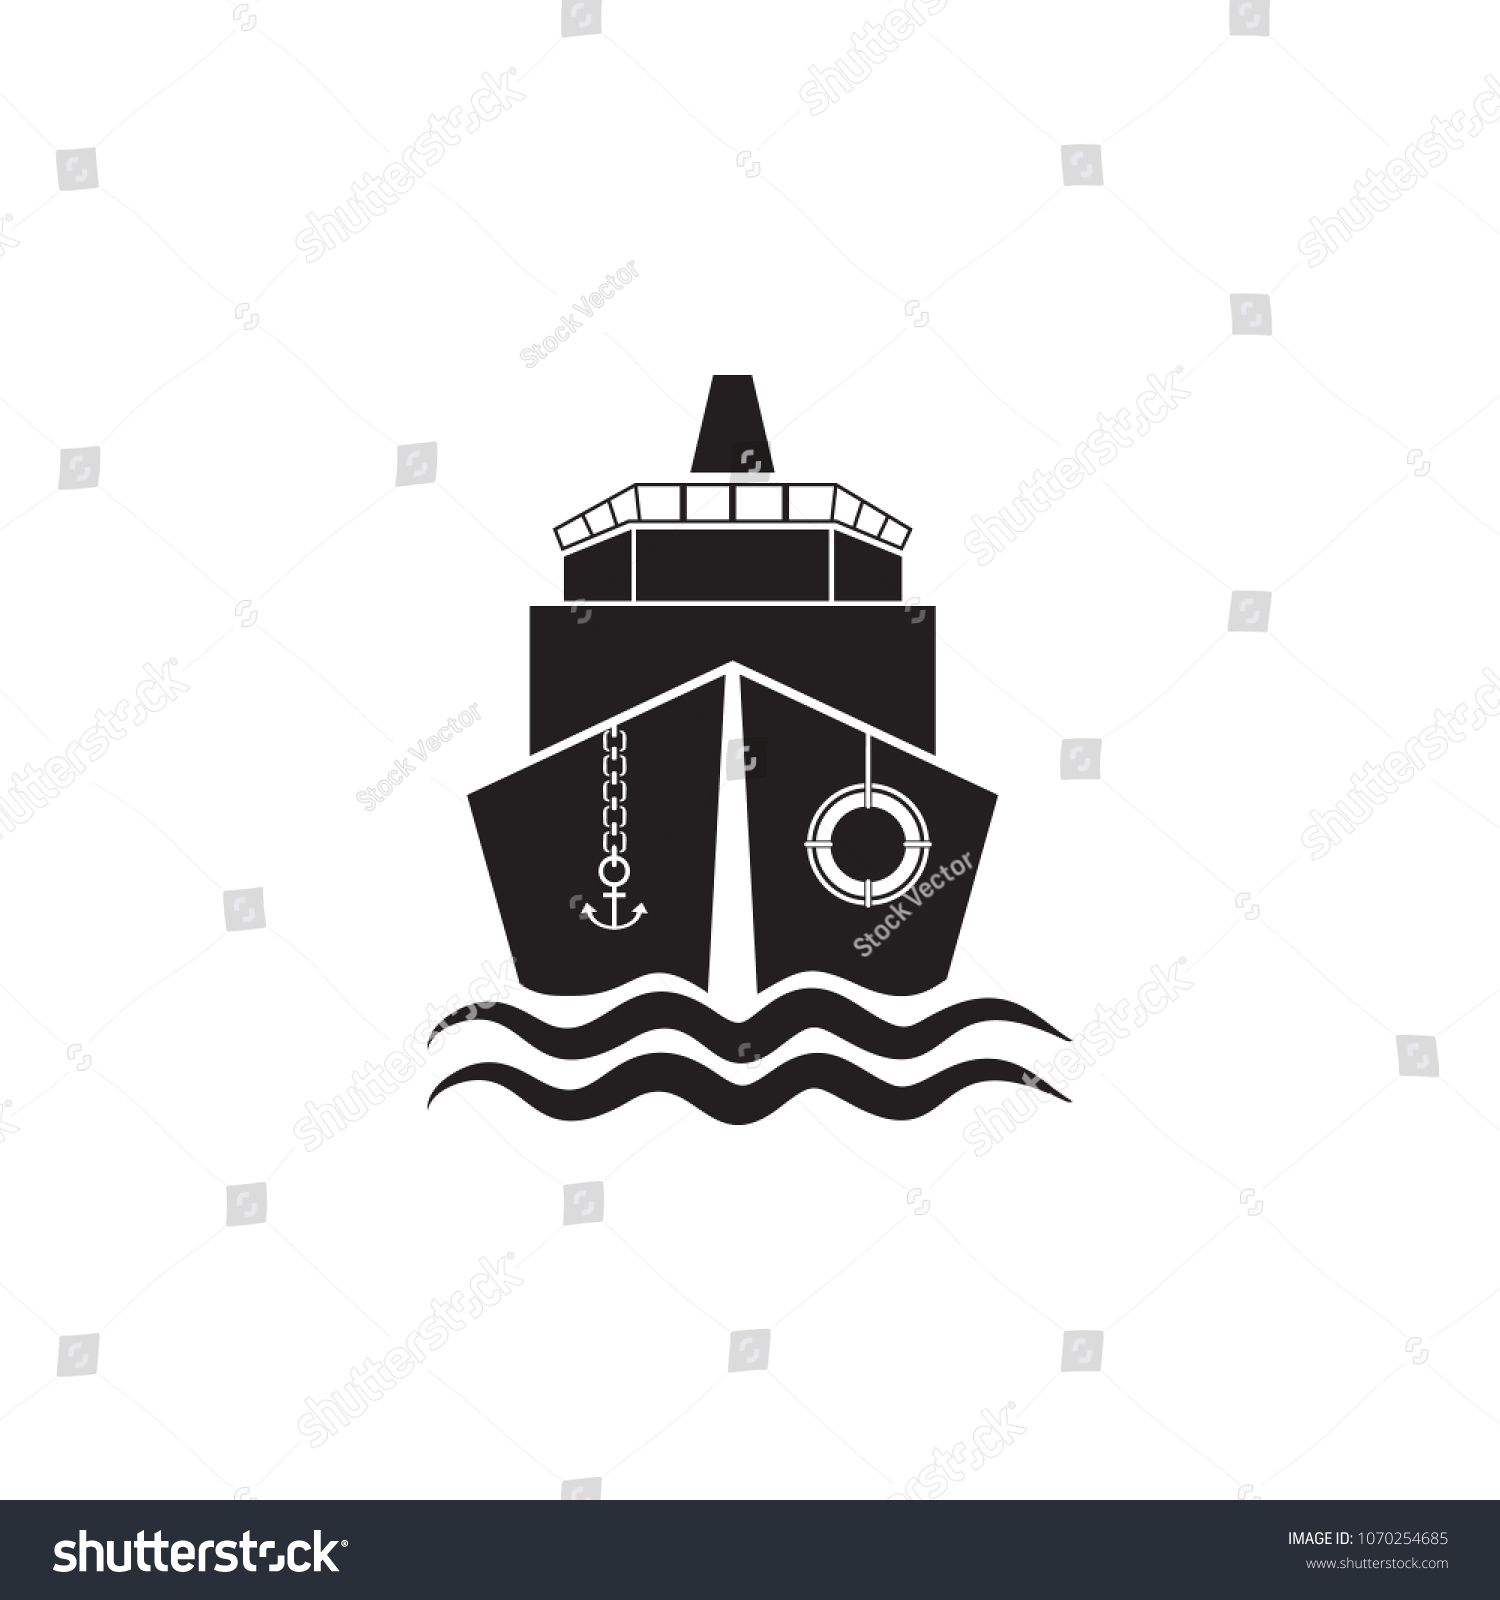 SVG of ship front view icon. Element of ship illustration. Premium quality graphic design icon. Signs and symbols collection icon for websites, web design, mobile app on white background svg